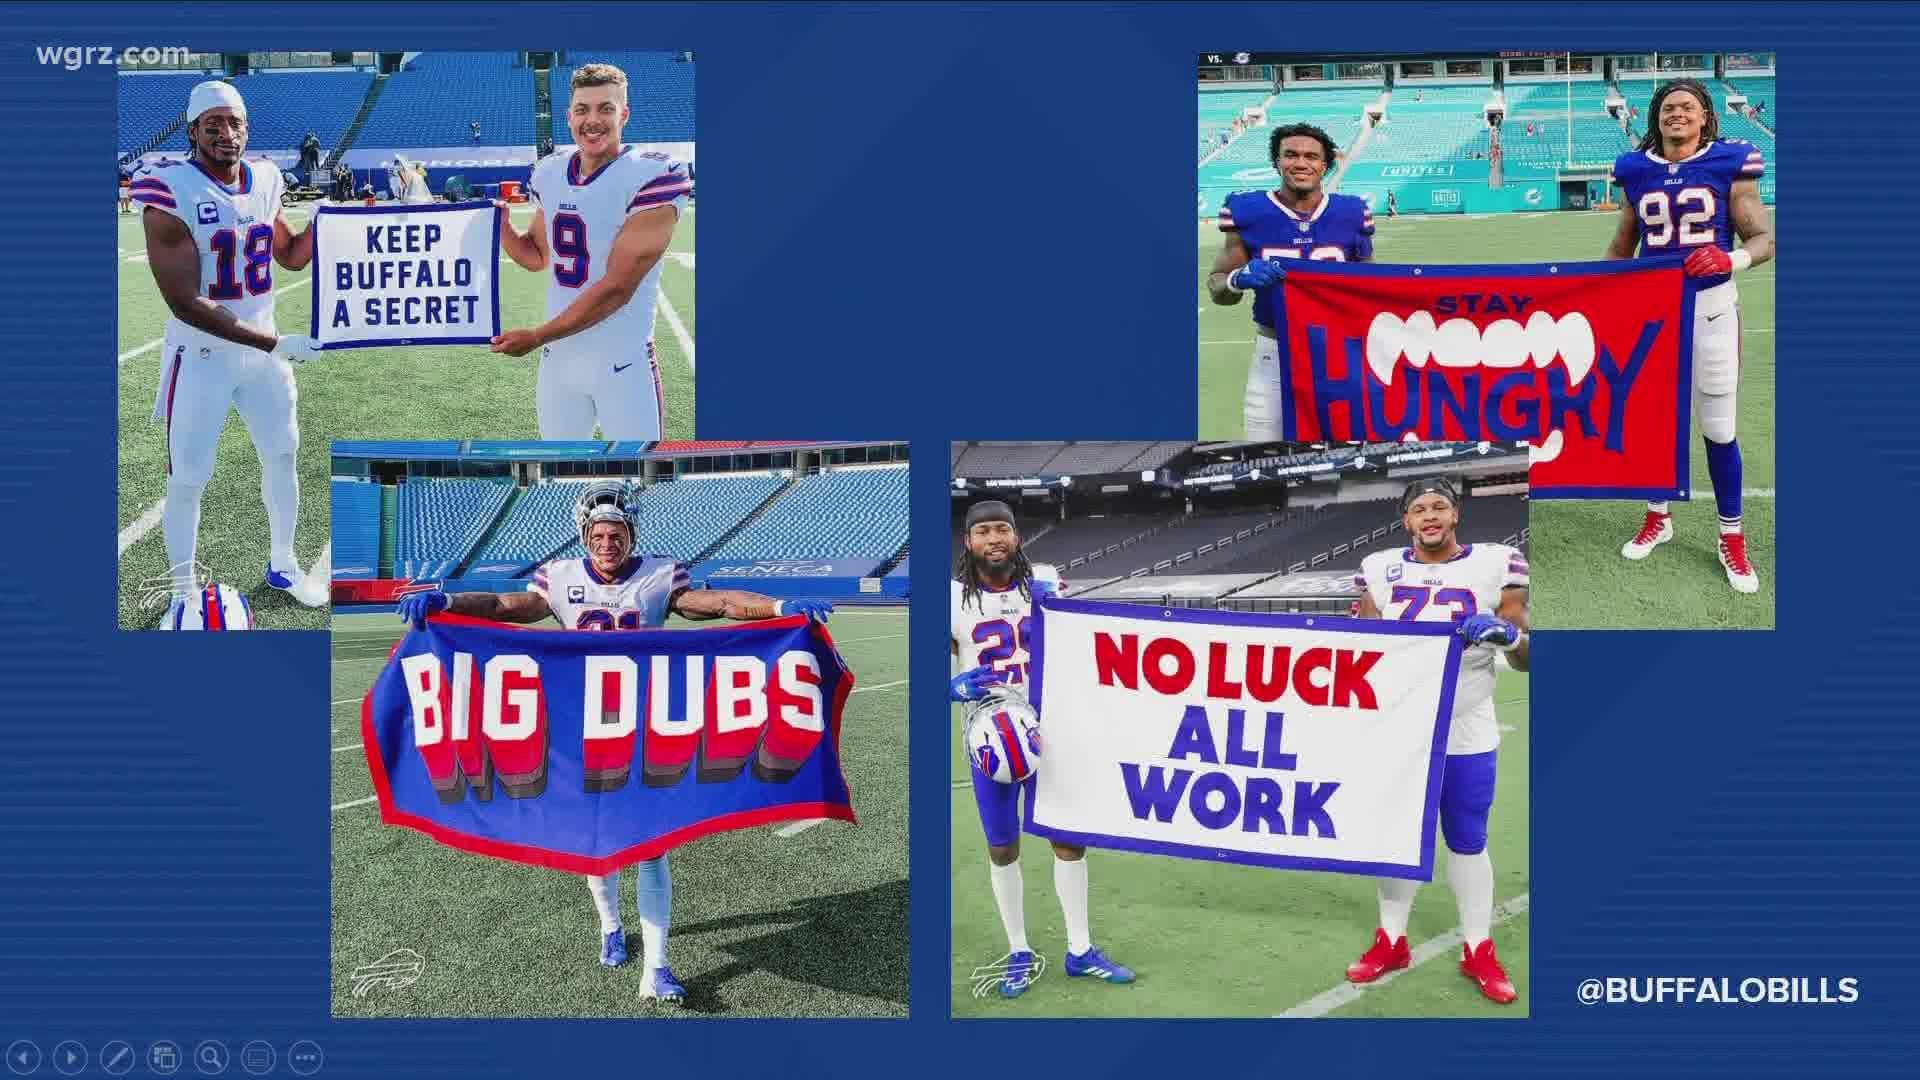 Banners are designed each week and made available after the team wins